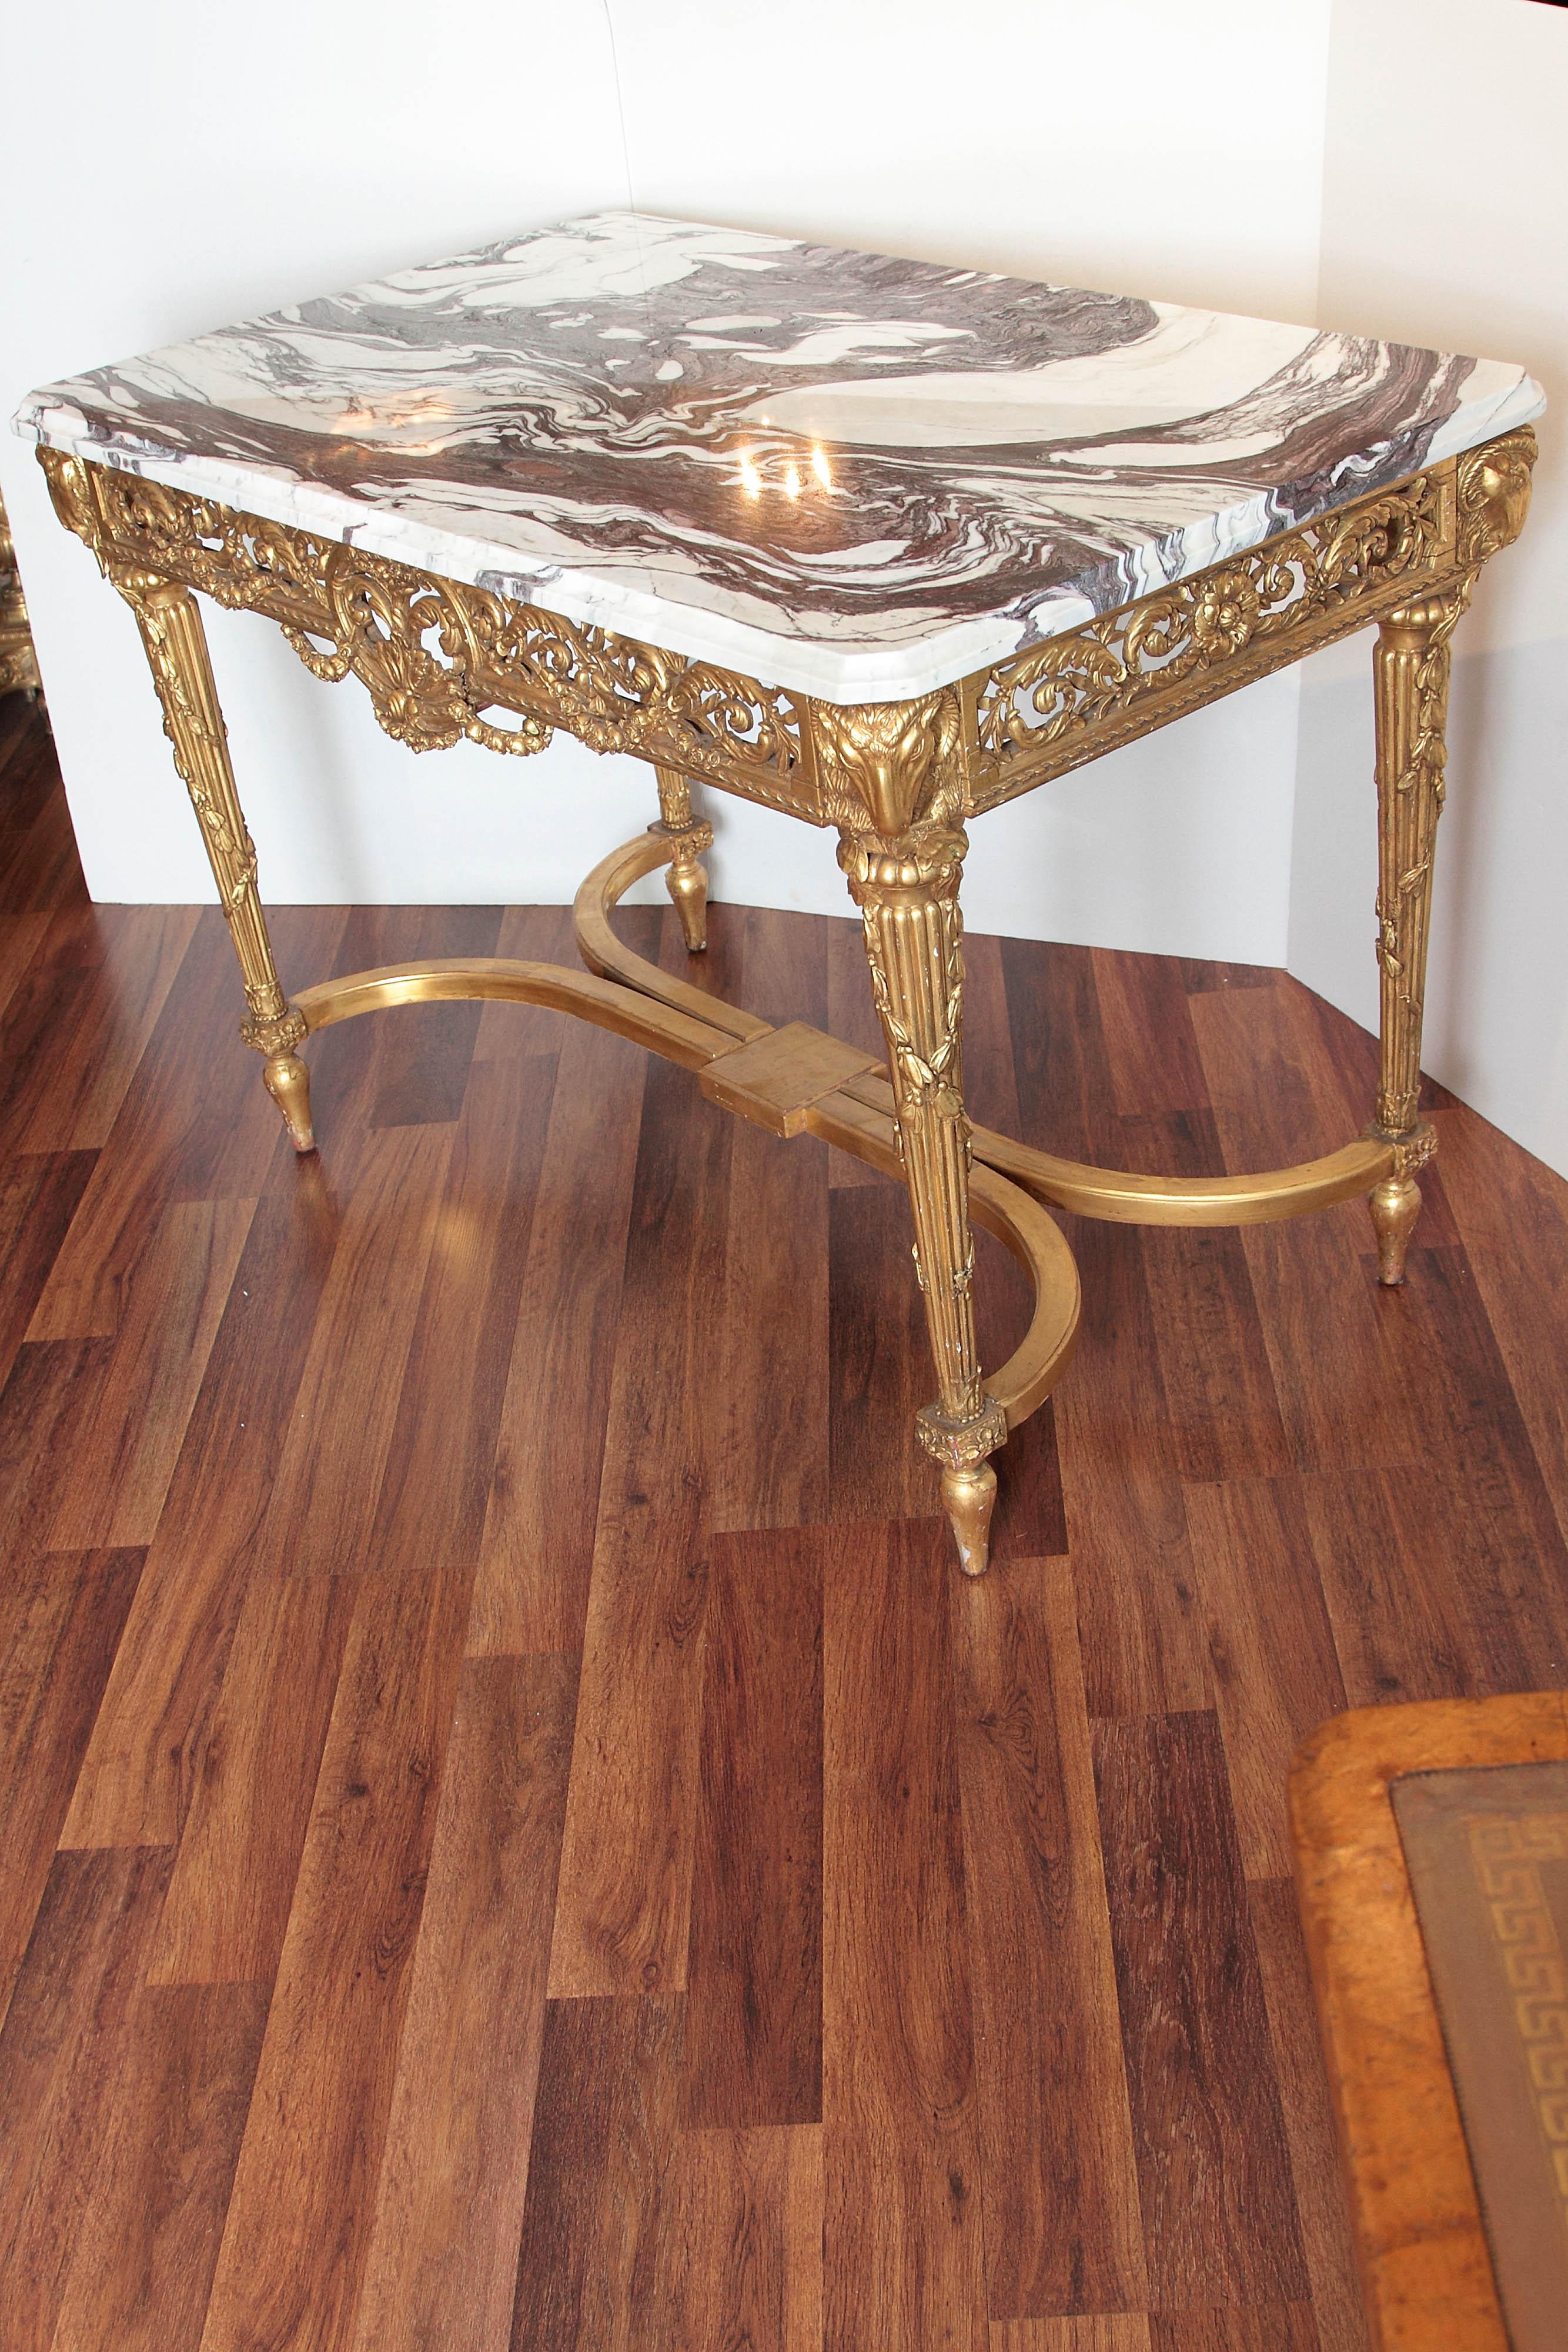 19th Century French Louis XVI Gilt Carved Salon Table For Sale 1